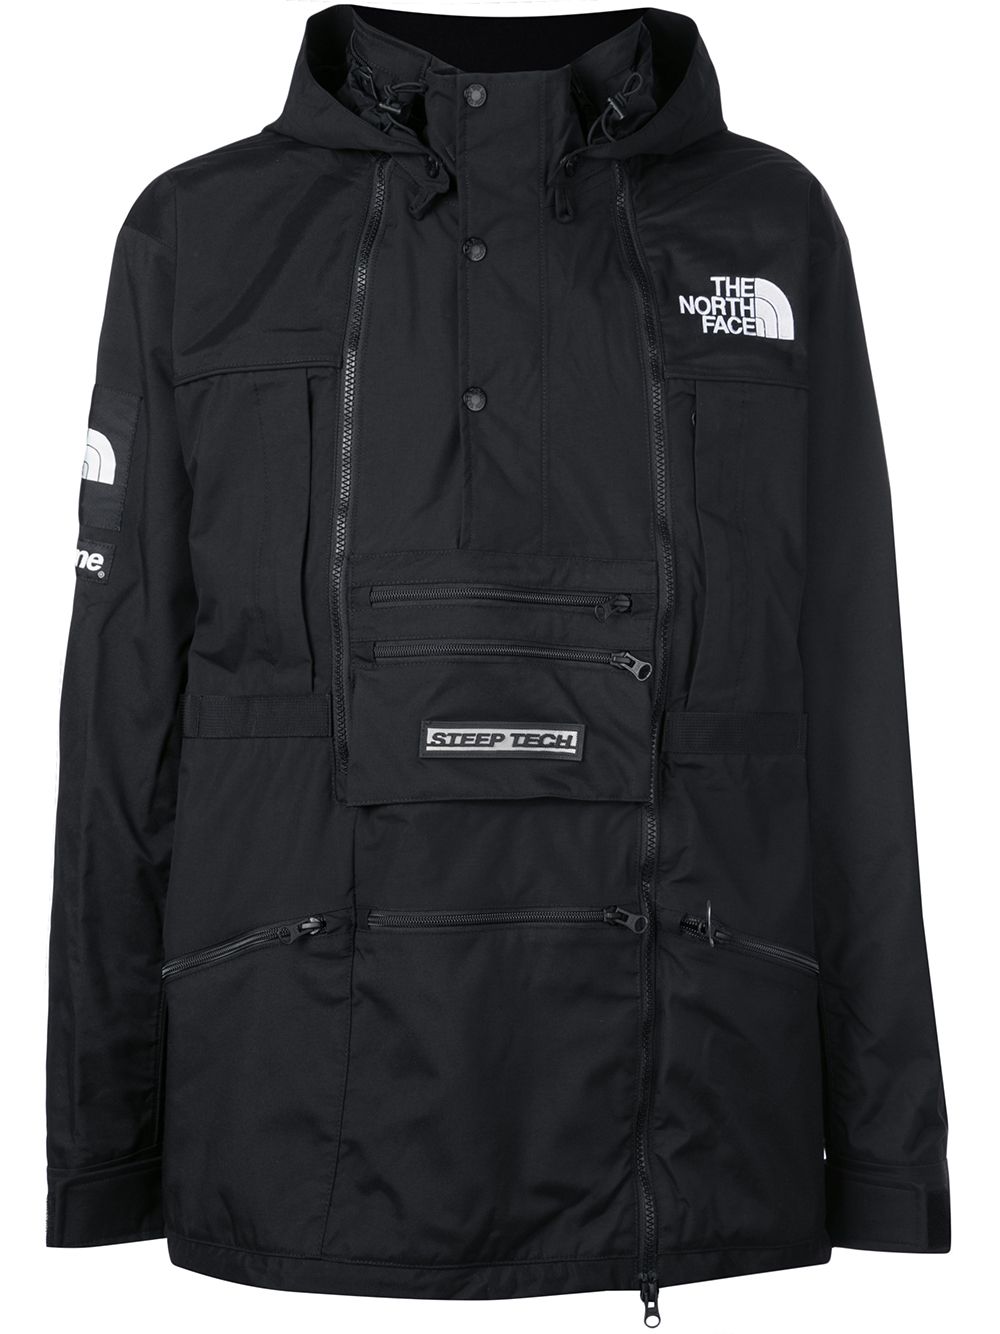 x The North Face steep tech hooded jacket